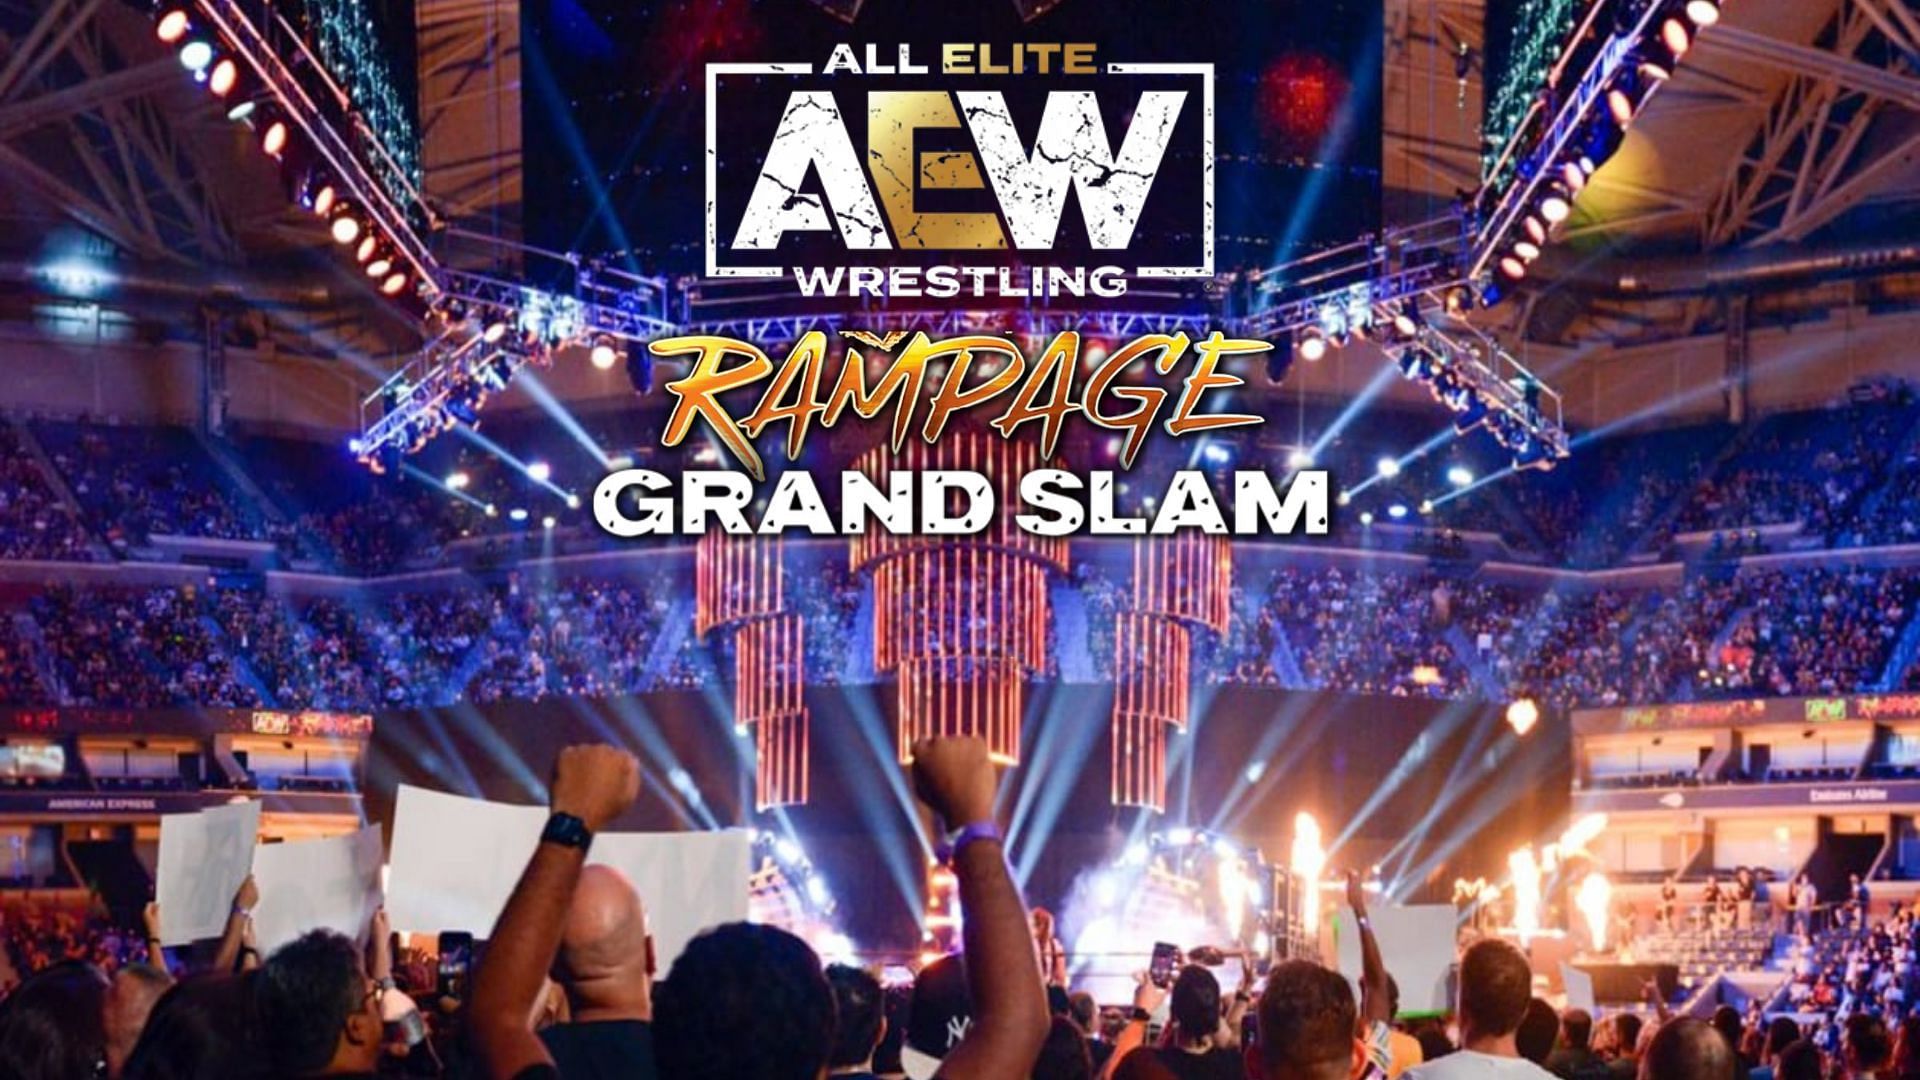 AEW Rampage: Grand Slam had a stacked card of matches